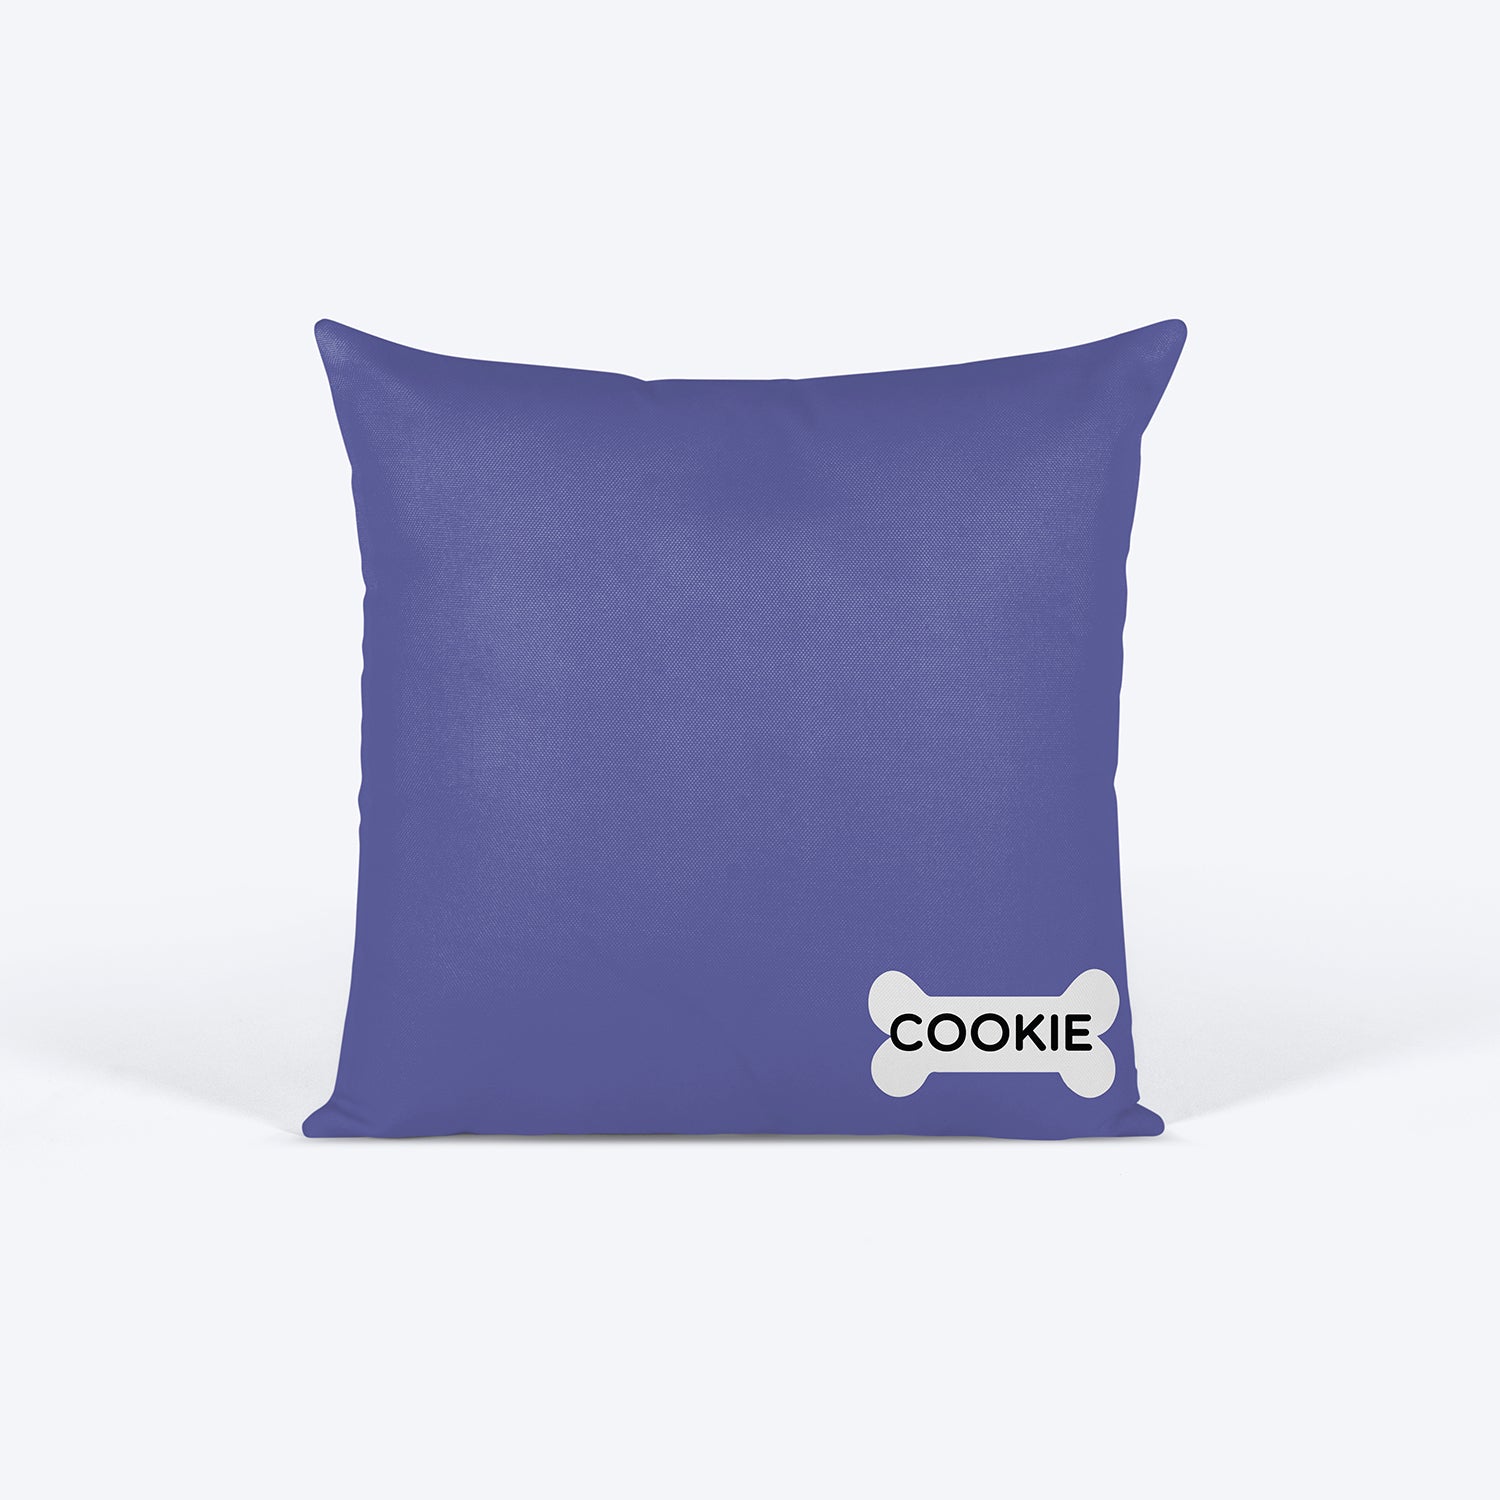 HUFT Bone Design Personalised Cushion - 12 inches (30 x 30 cm) - Heads Up For Tails